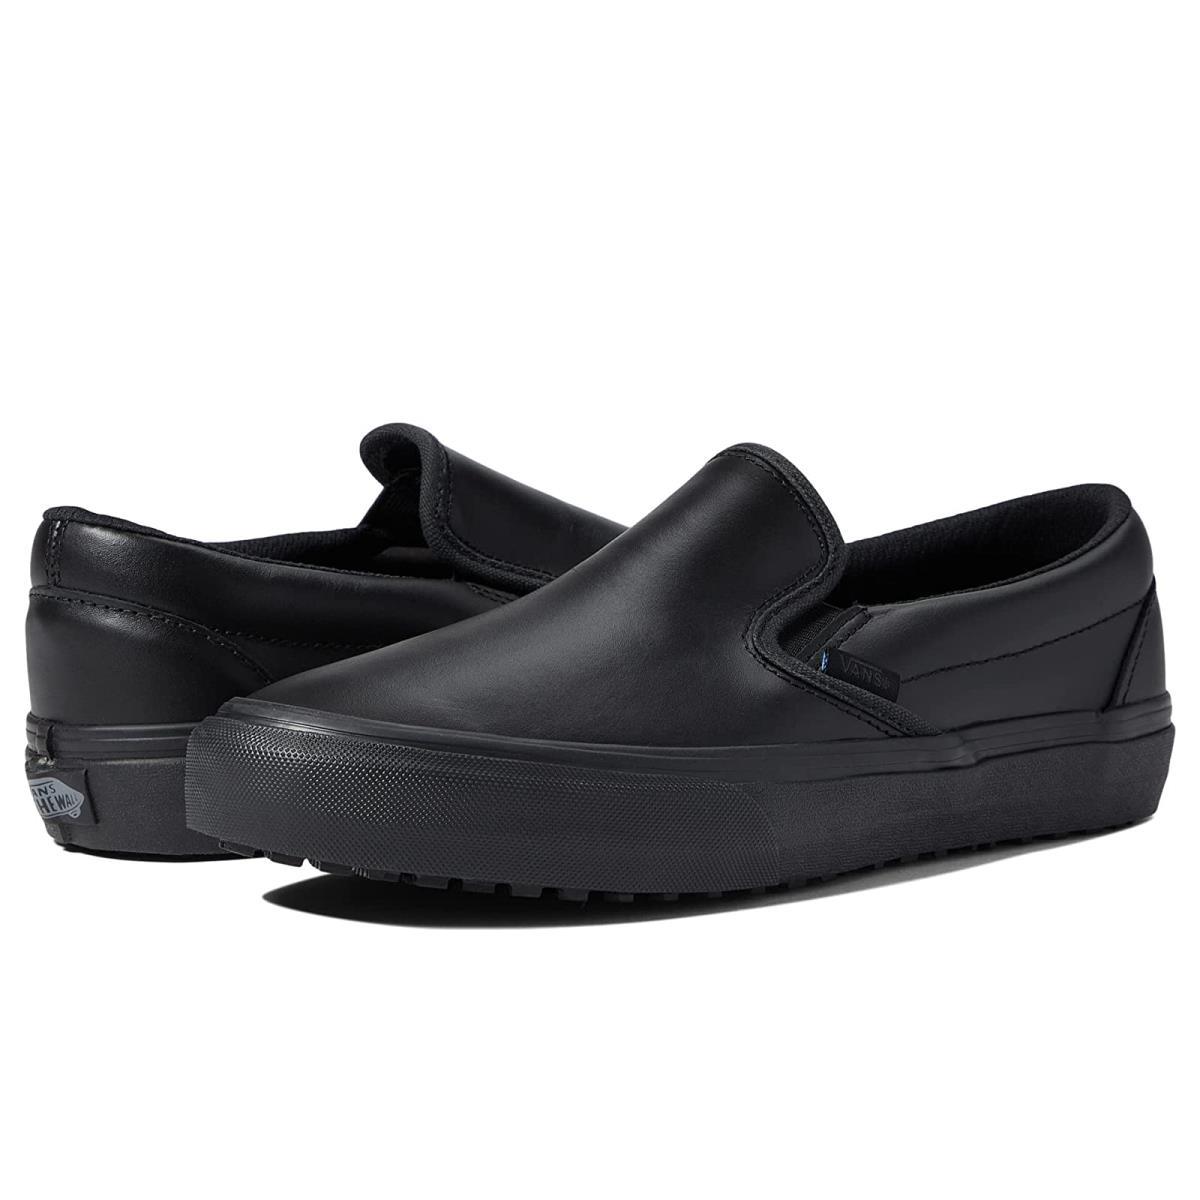 Unisex Shoes Vans Made For The Makers Classic Slip-on UC (Leather) Black/Black